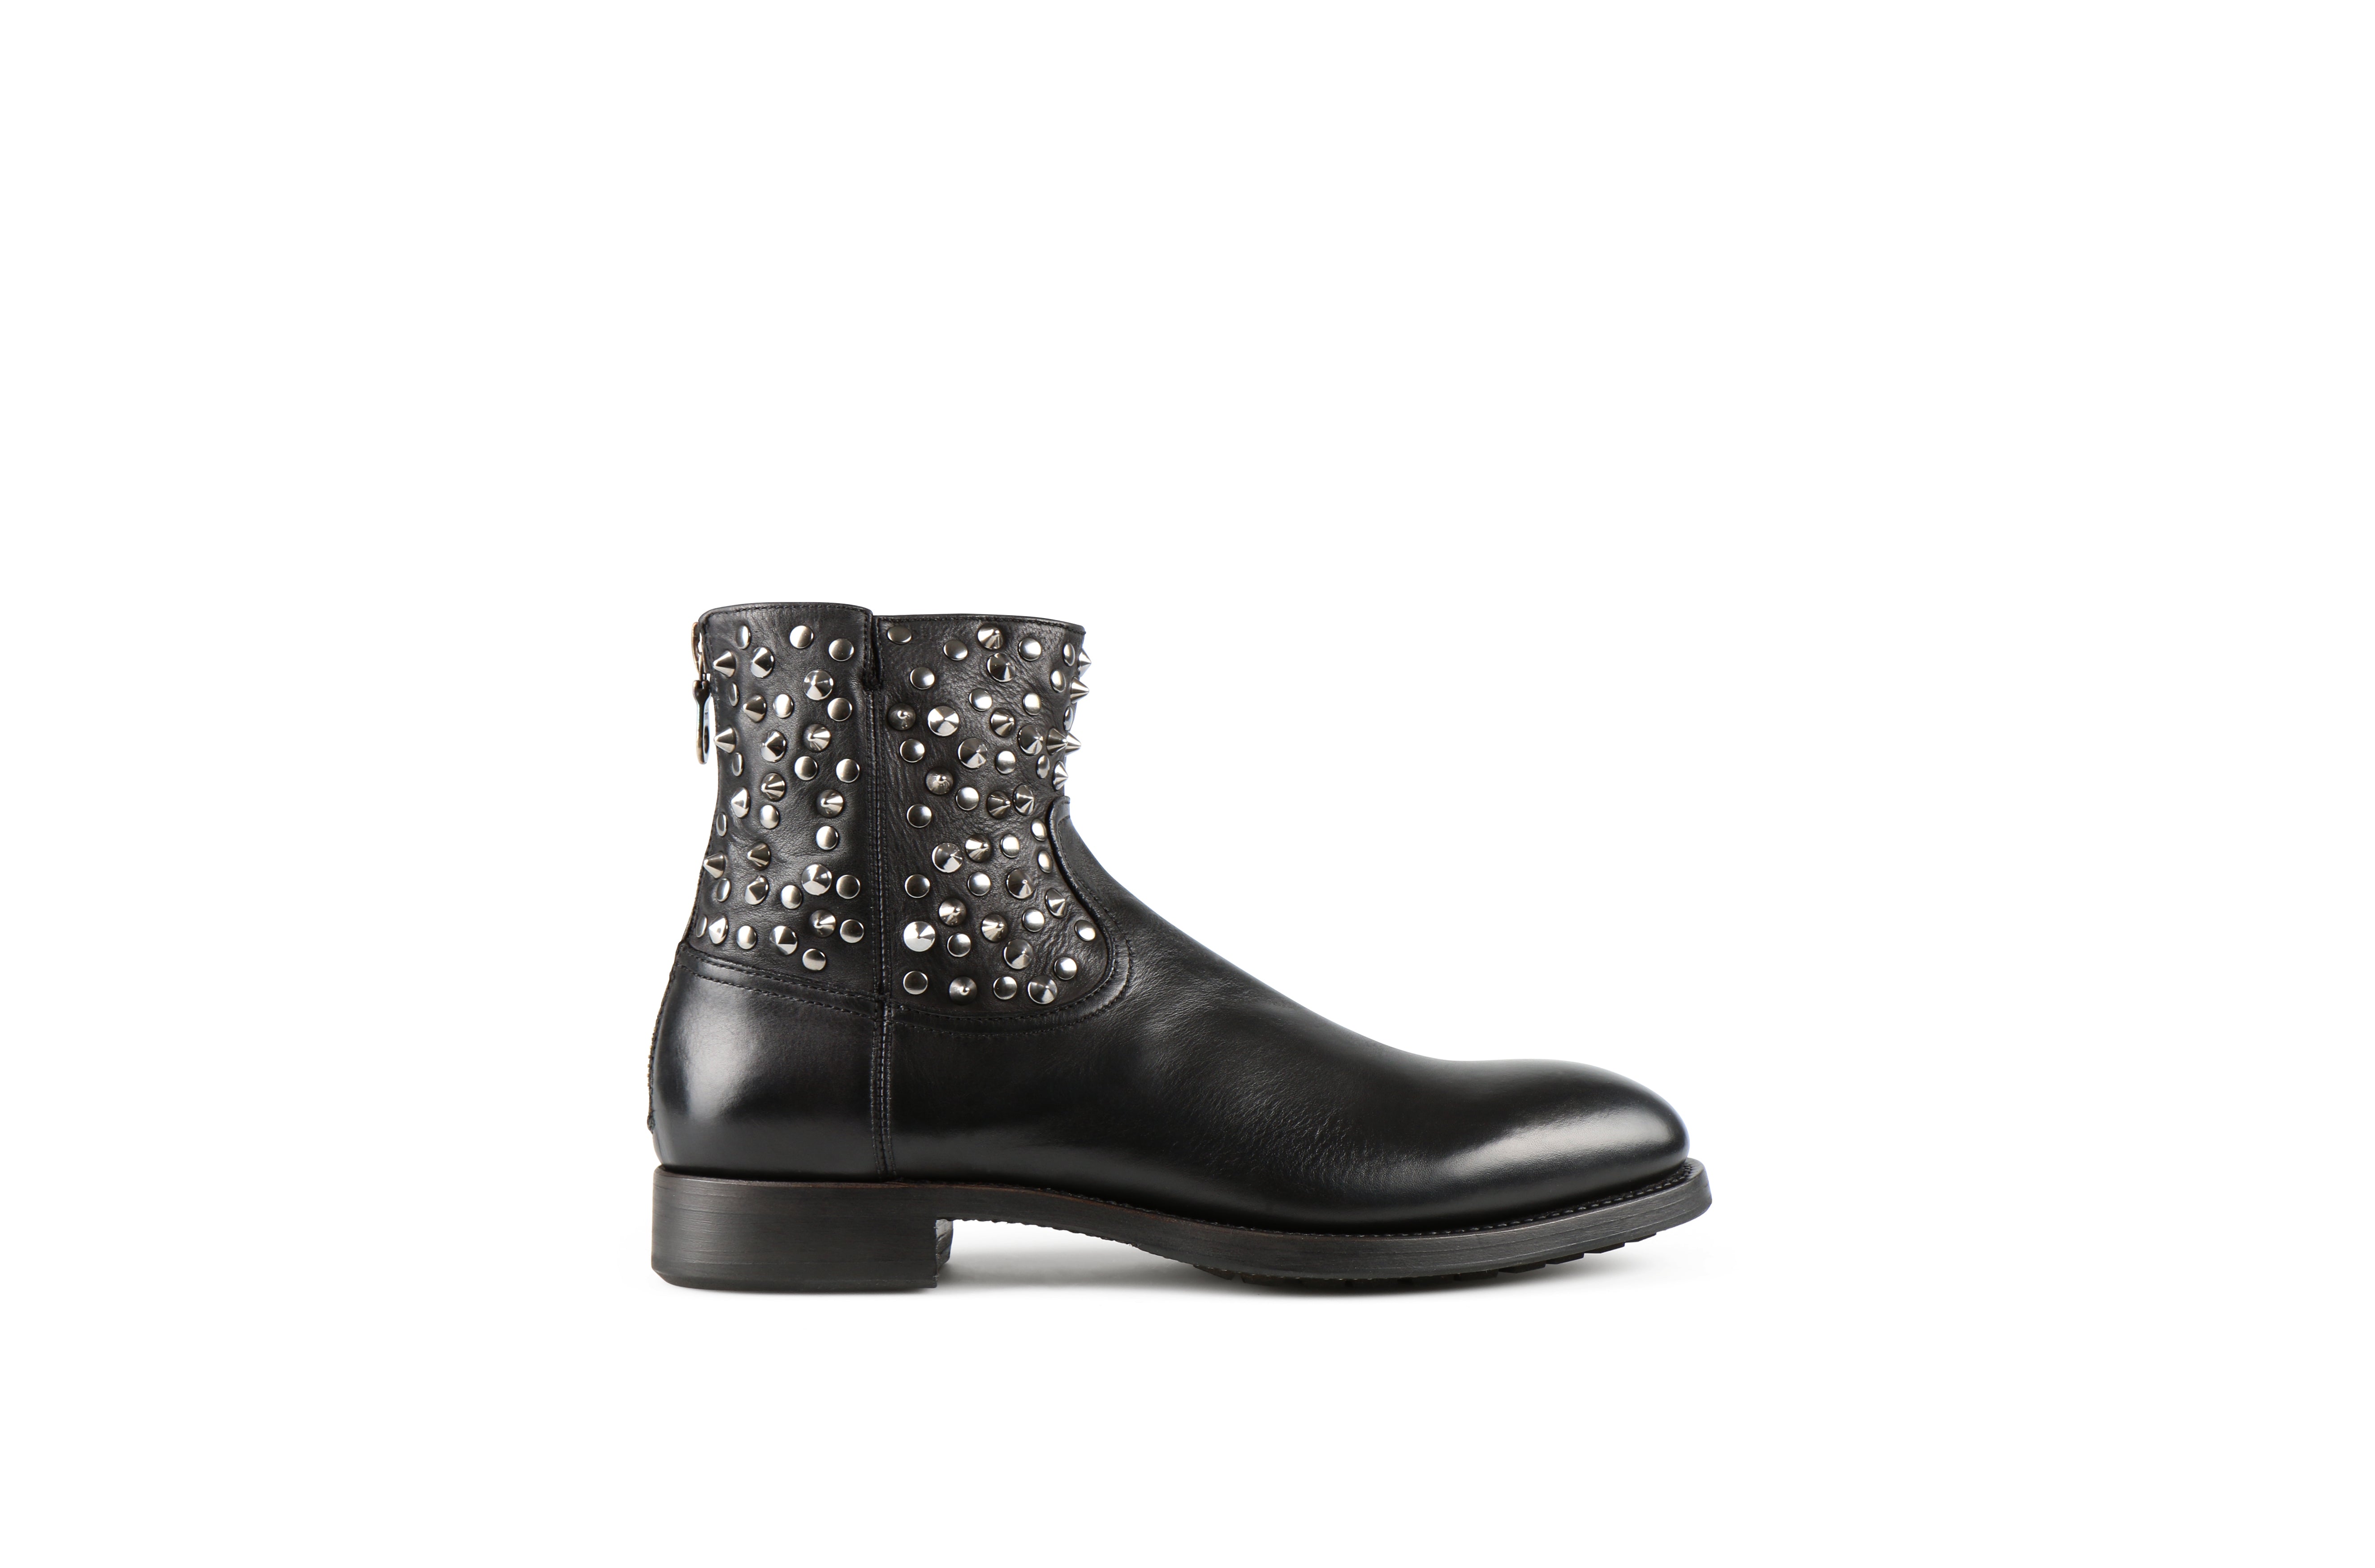 Flame Studs 2 Black Washed Calf Leather Zipper Boots